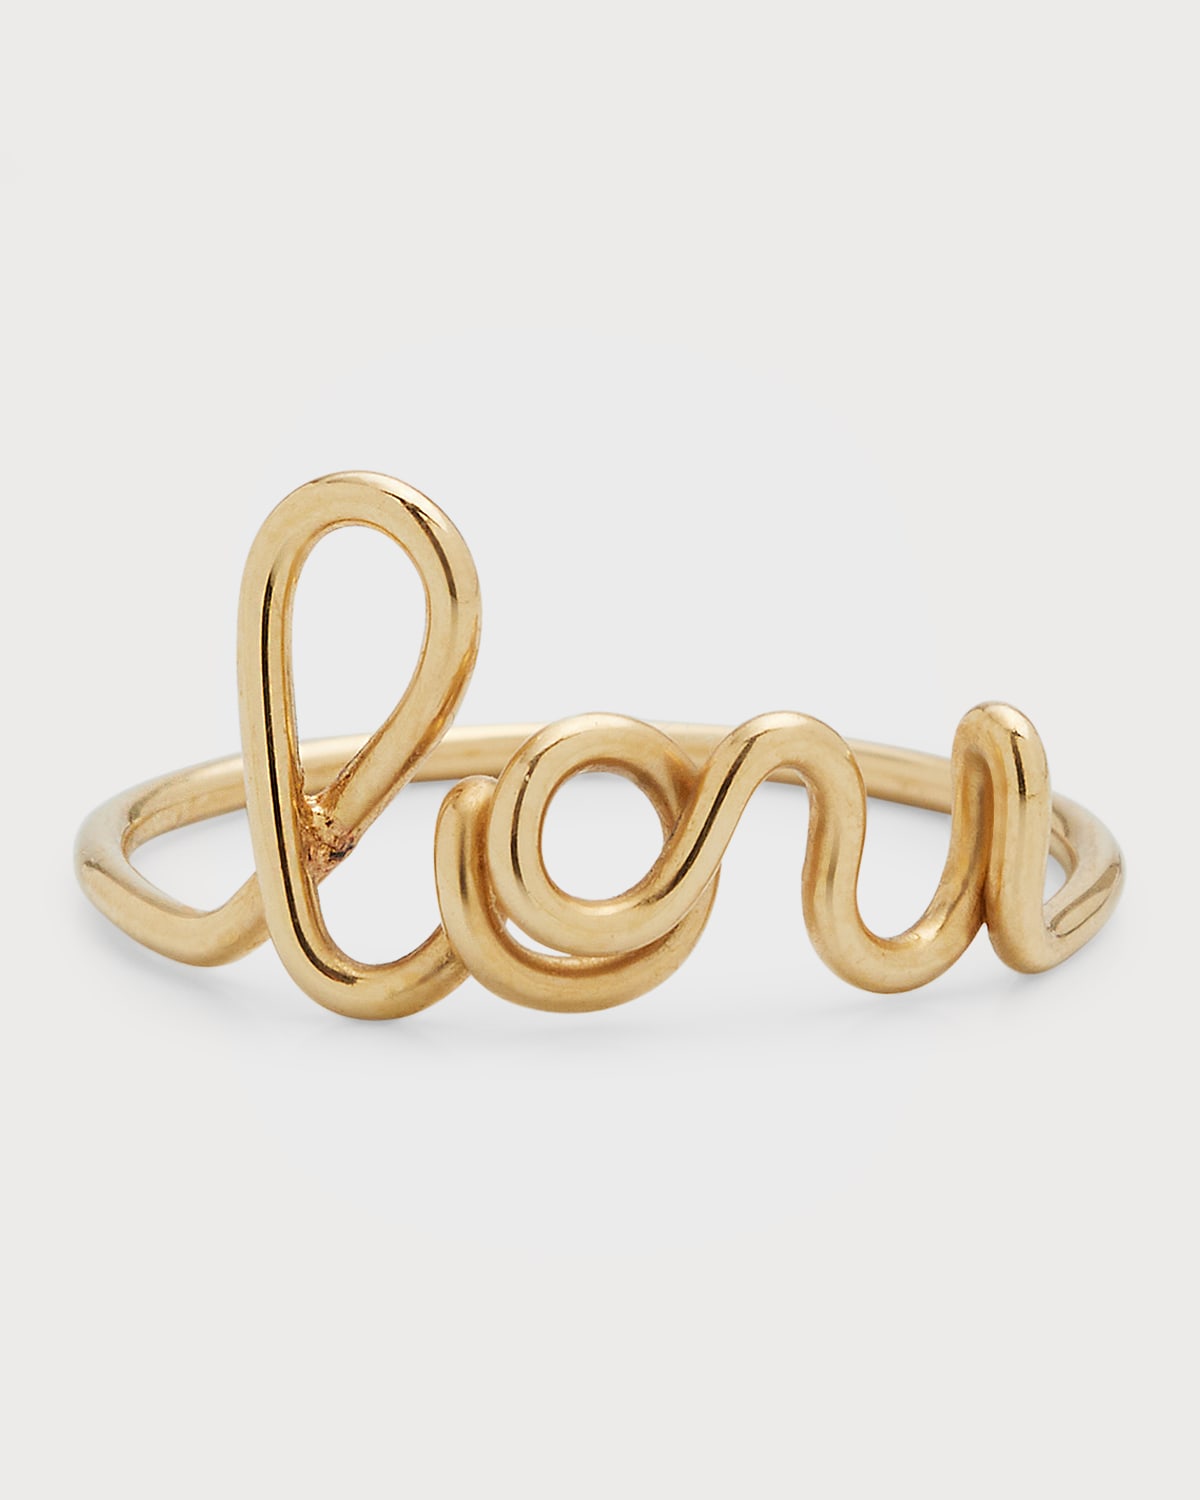 Atelier Paulin Original Personalized Ring In Yellow Gold